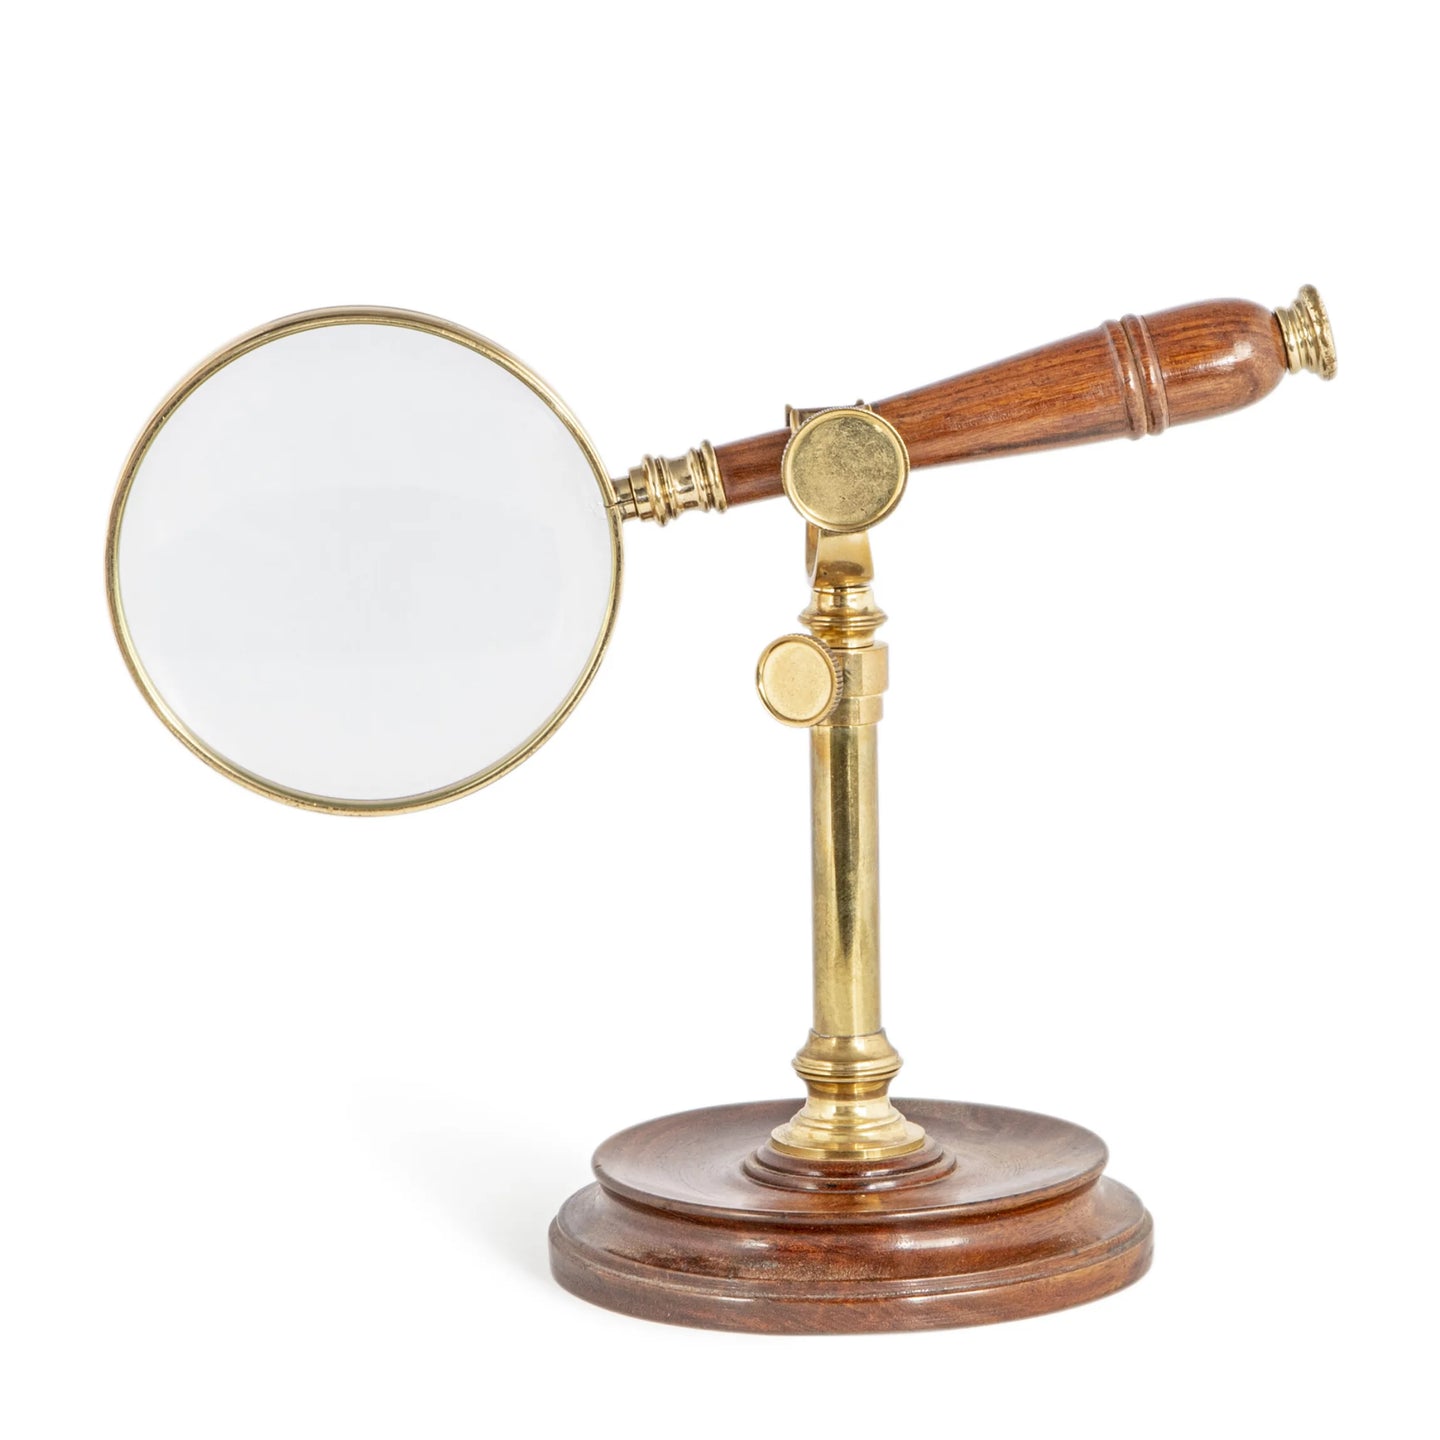 Authentic Models Magnifying Glass With Stand - AC099A